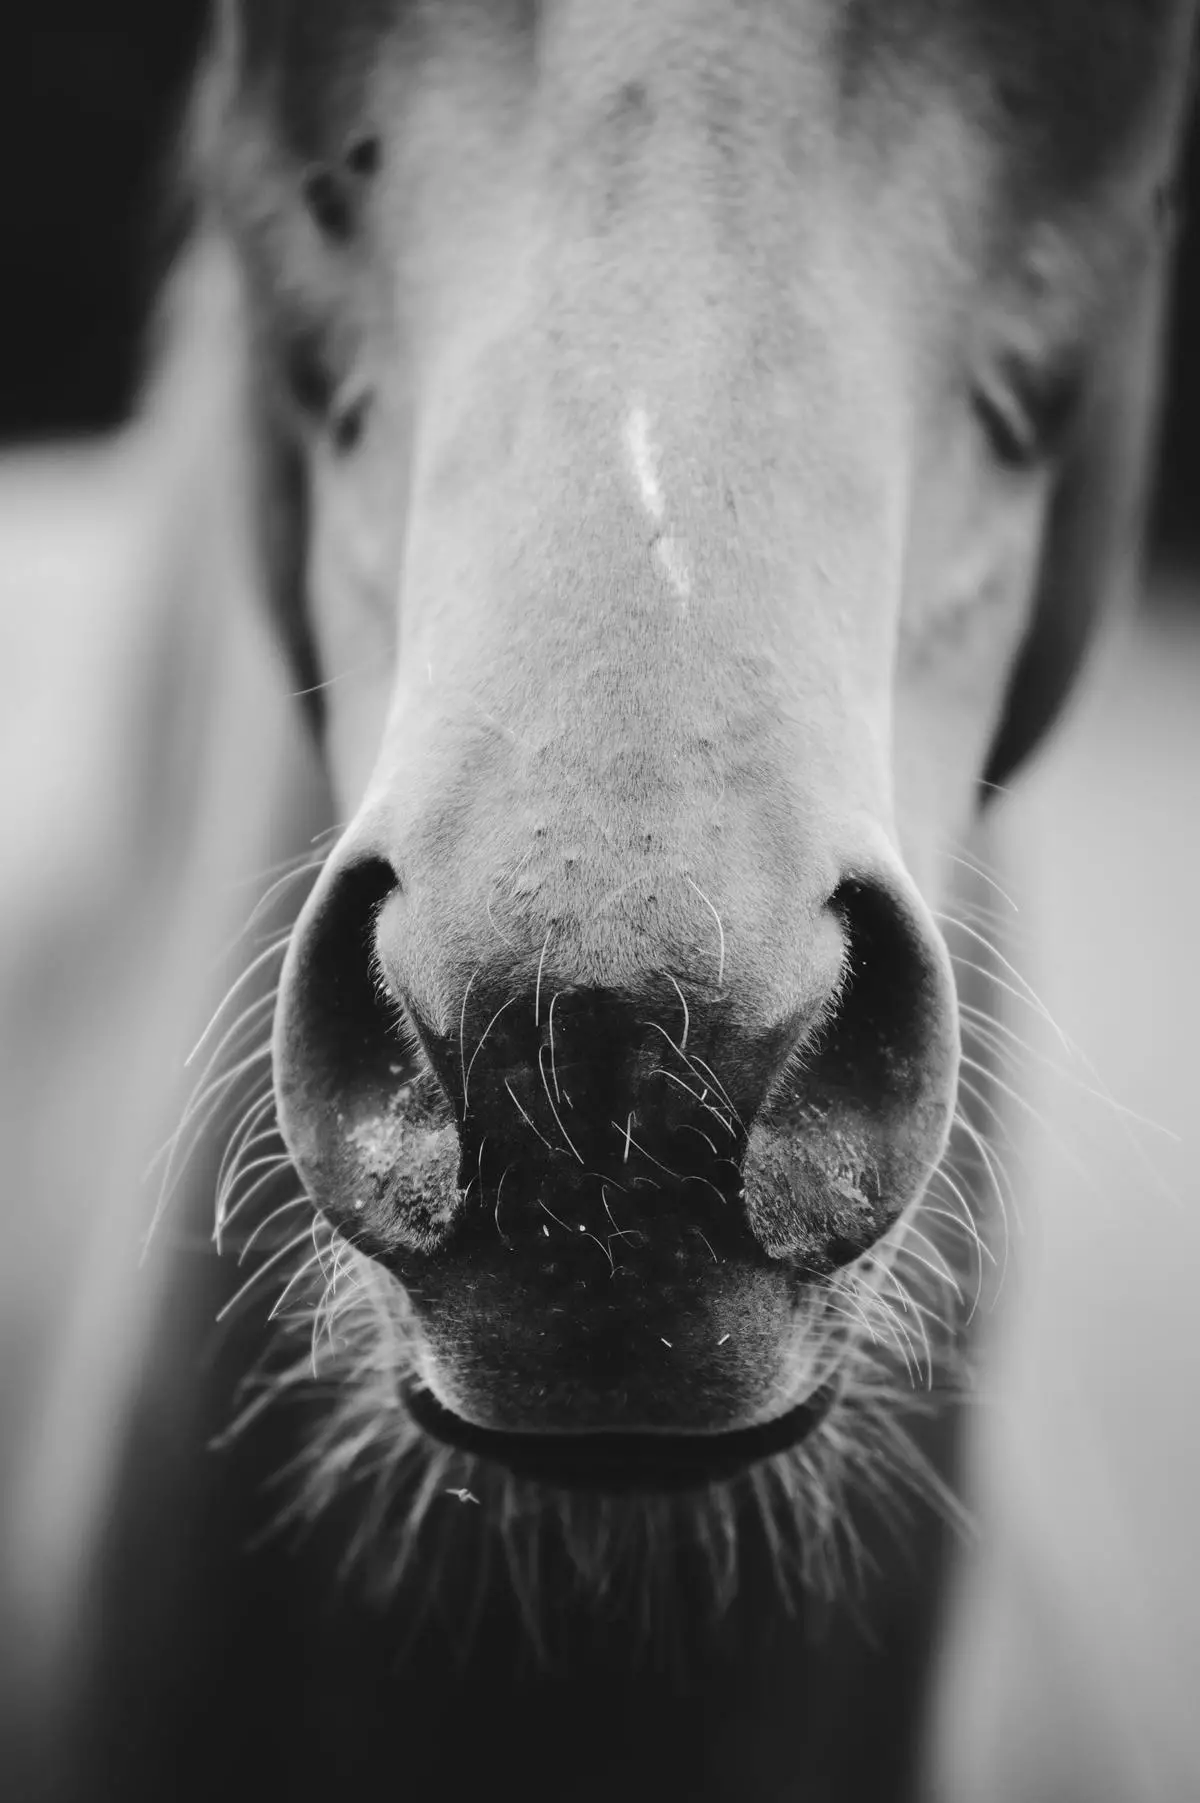 Image of a horse being registered showing the paperwork and a horse's identification tag.